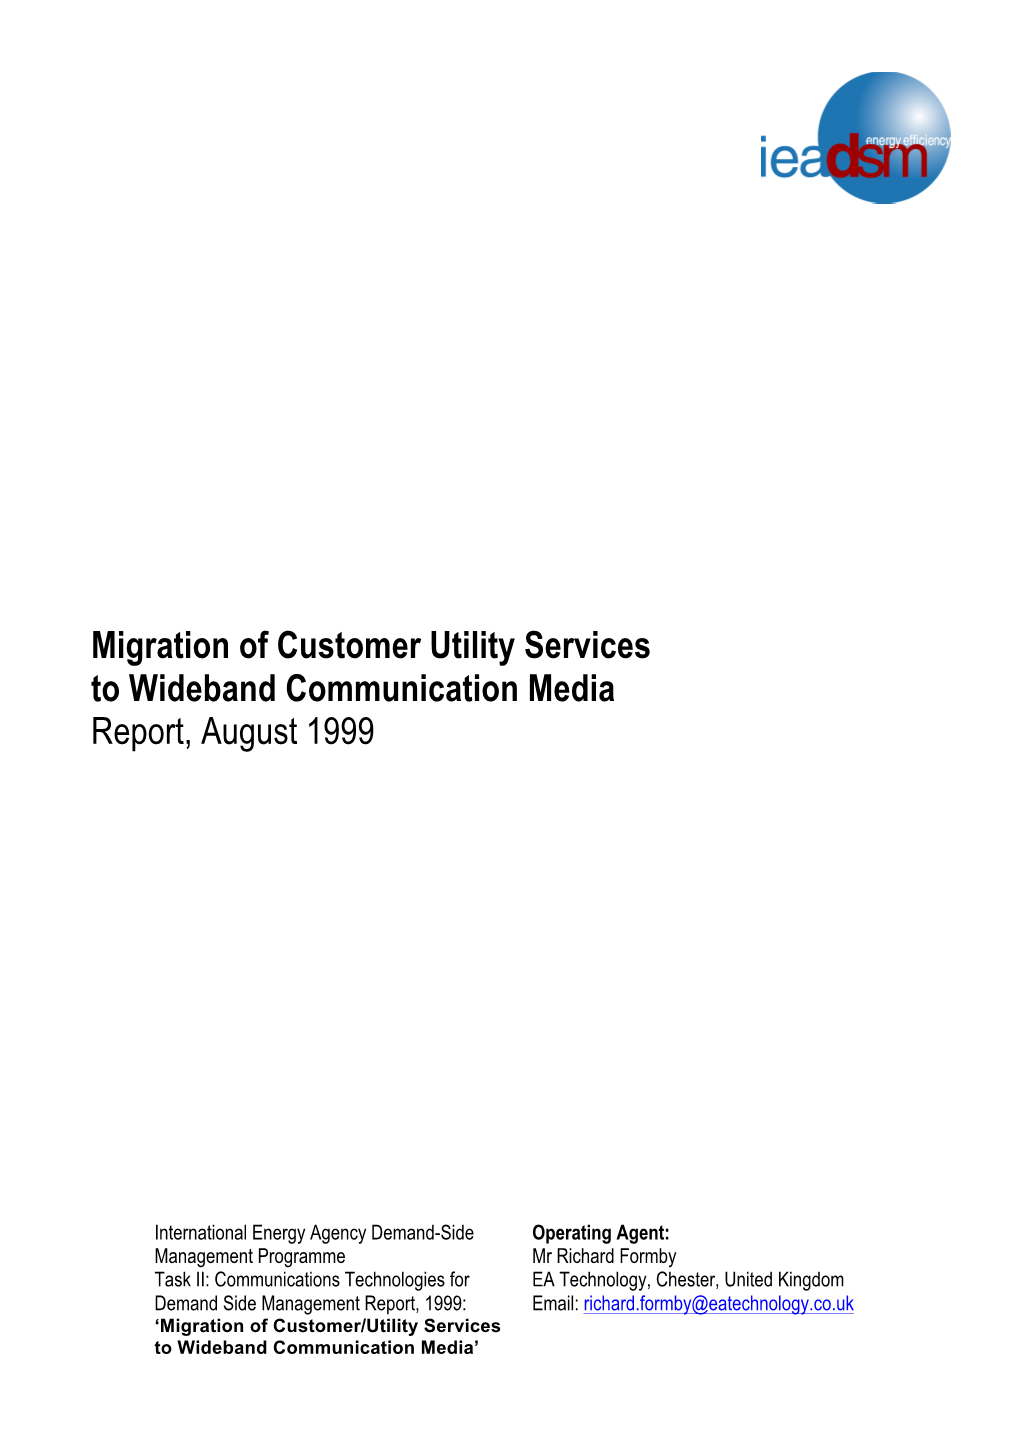 Task 2 Report Migration of Customer Utility Services August 1999